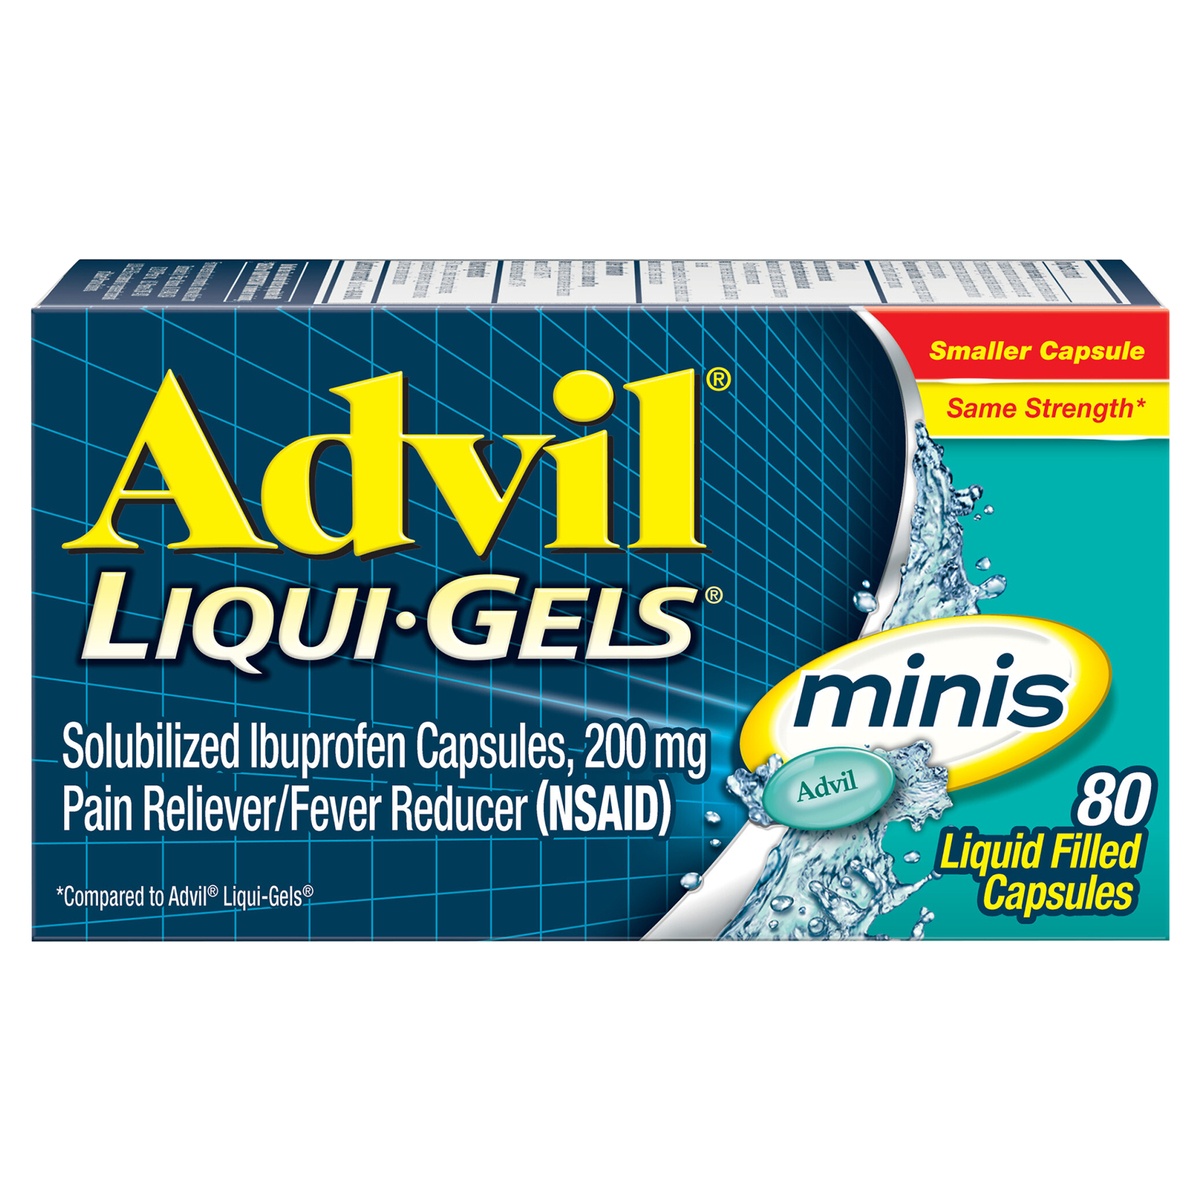 slide 1 of 7, Advil Liqui-Gels minis Pain Reliever and Fever Reducer, Ibuprofen 200mg for Pain Relief - 80 Liquid Filled Capsules, 80 ct